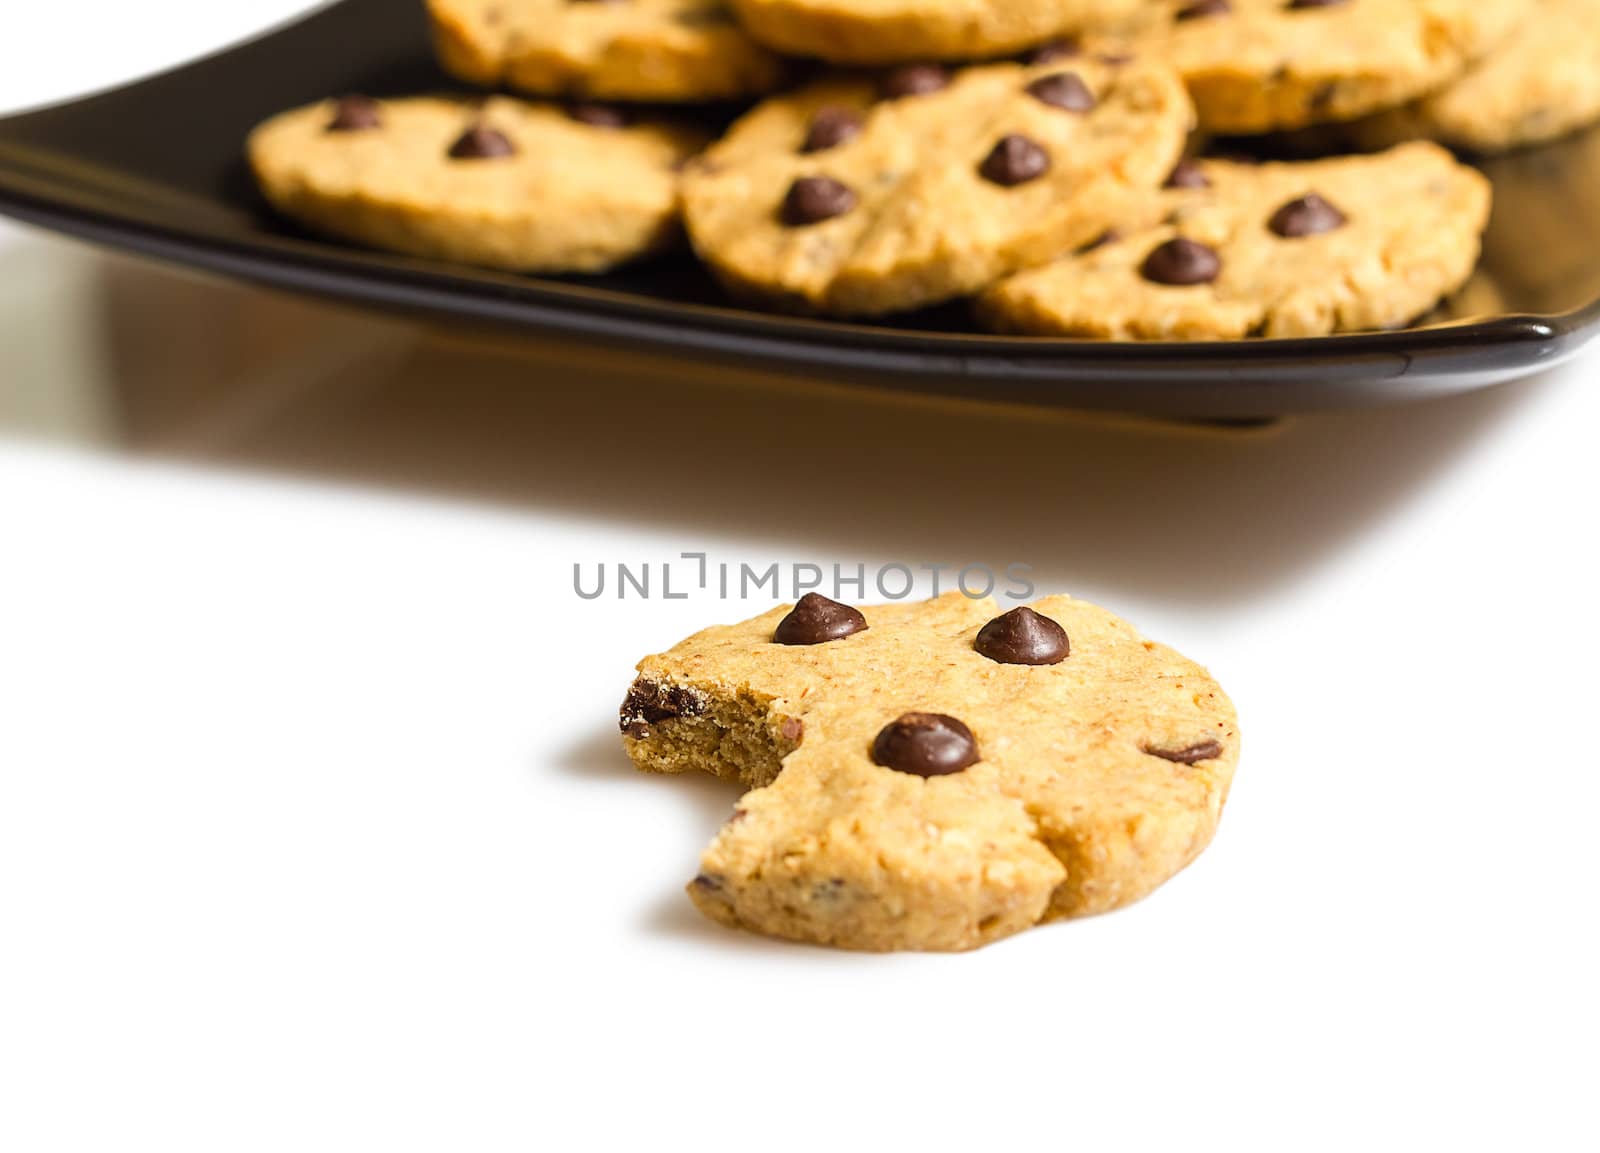 Chocolate chip cookie with a bite and pile of cookies in a plate by doble.d